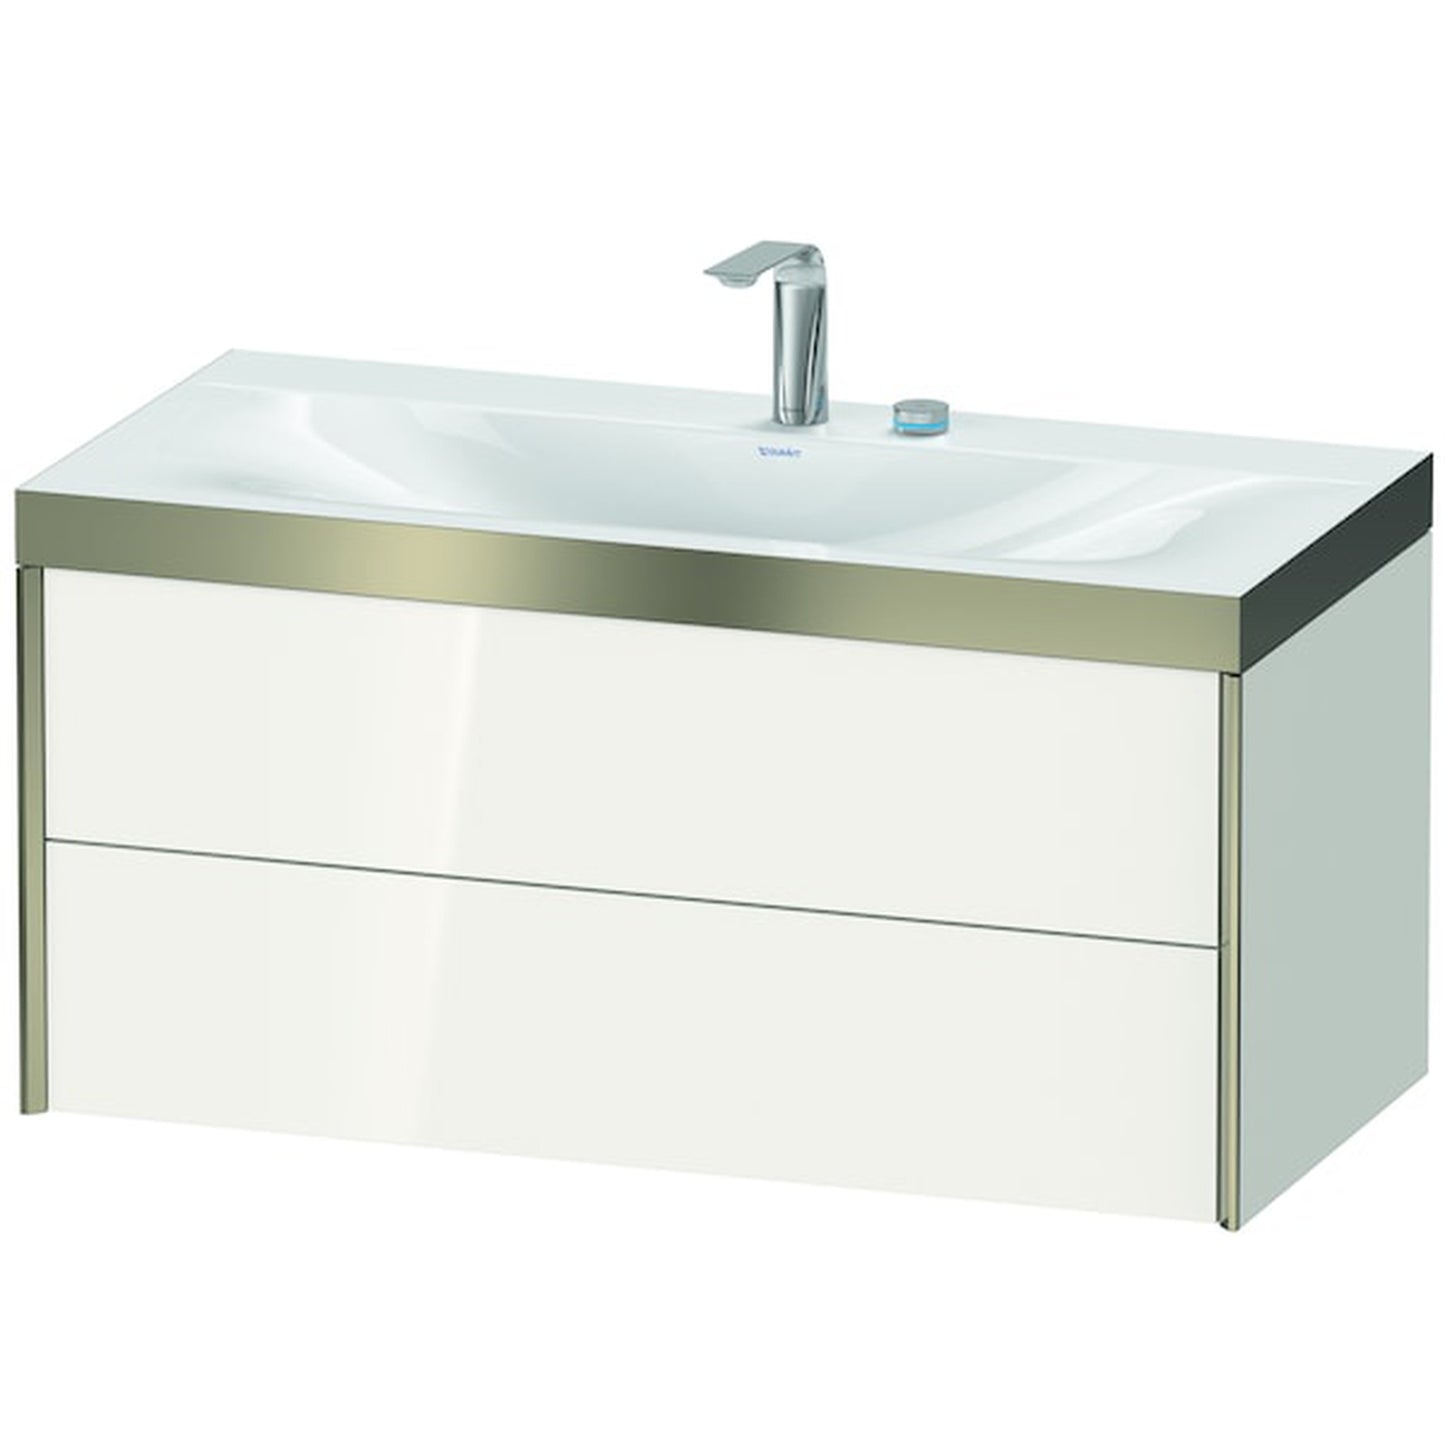 Duravit Xviu 39" x 20" x 19" Two Drawer C-Bonded Wall-Mount Vanity Kit With Two Tap Holes, White (XV4616EB122P)